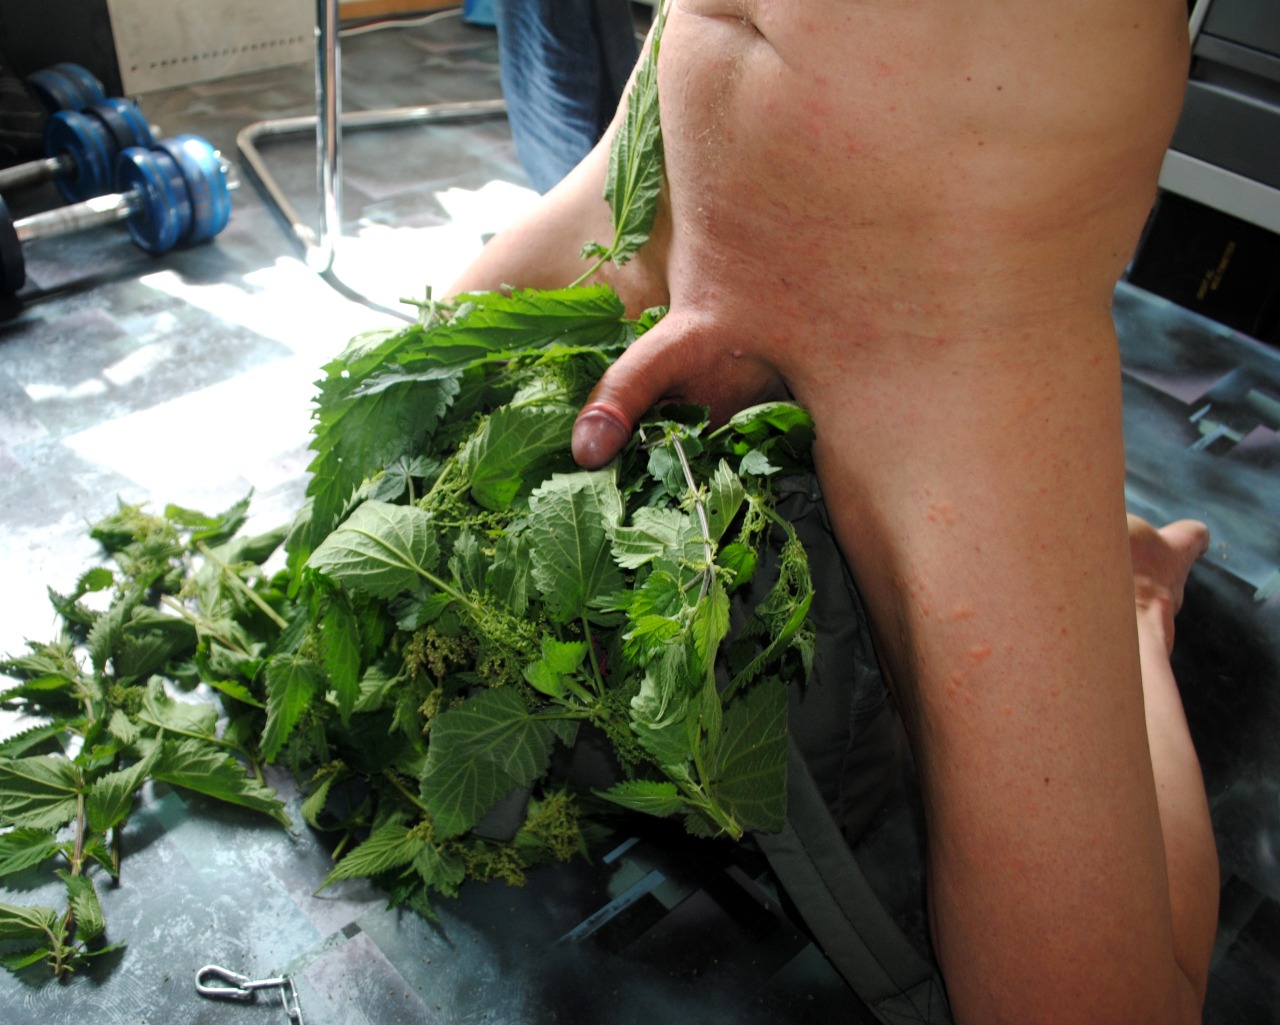 fresh nettles, what could be better than that?